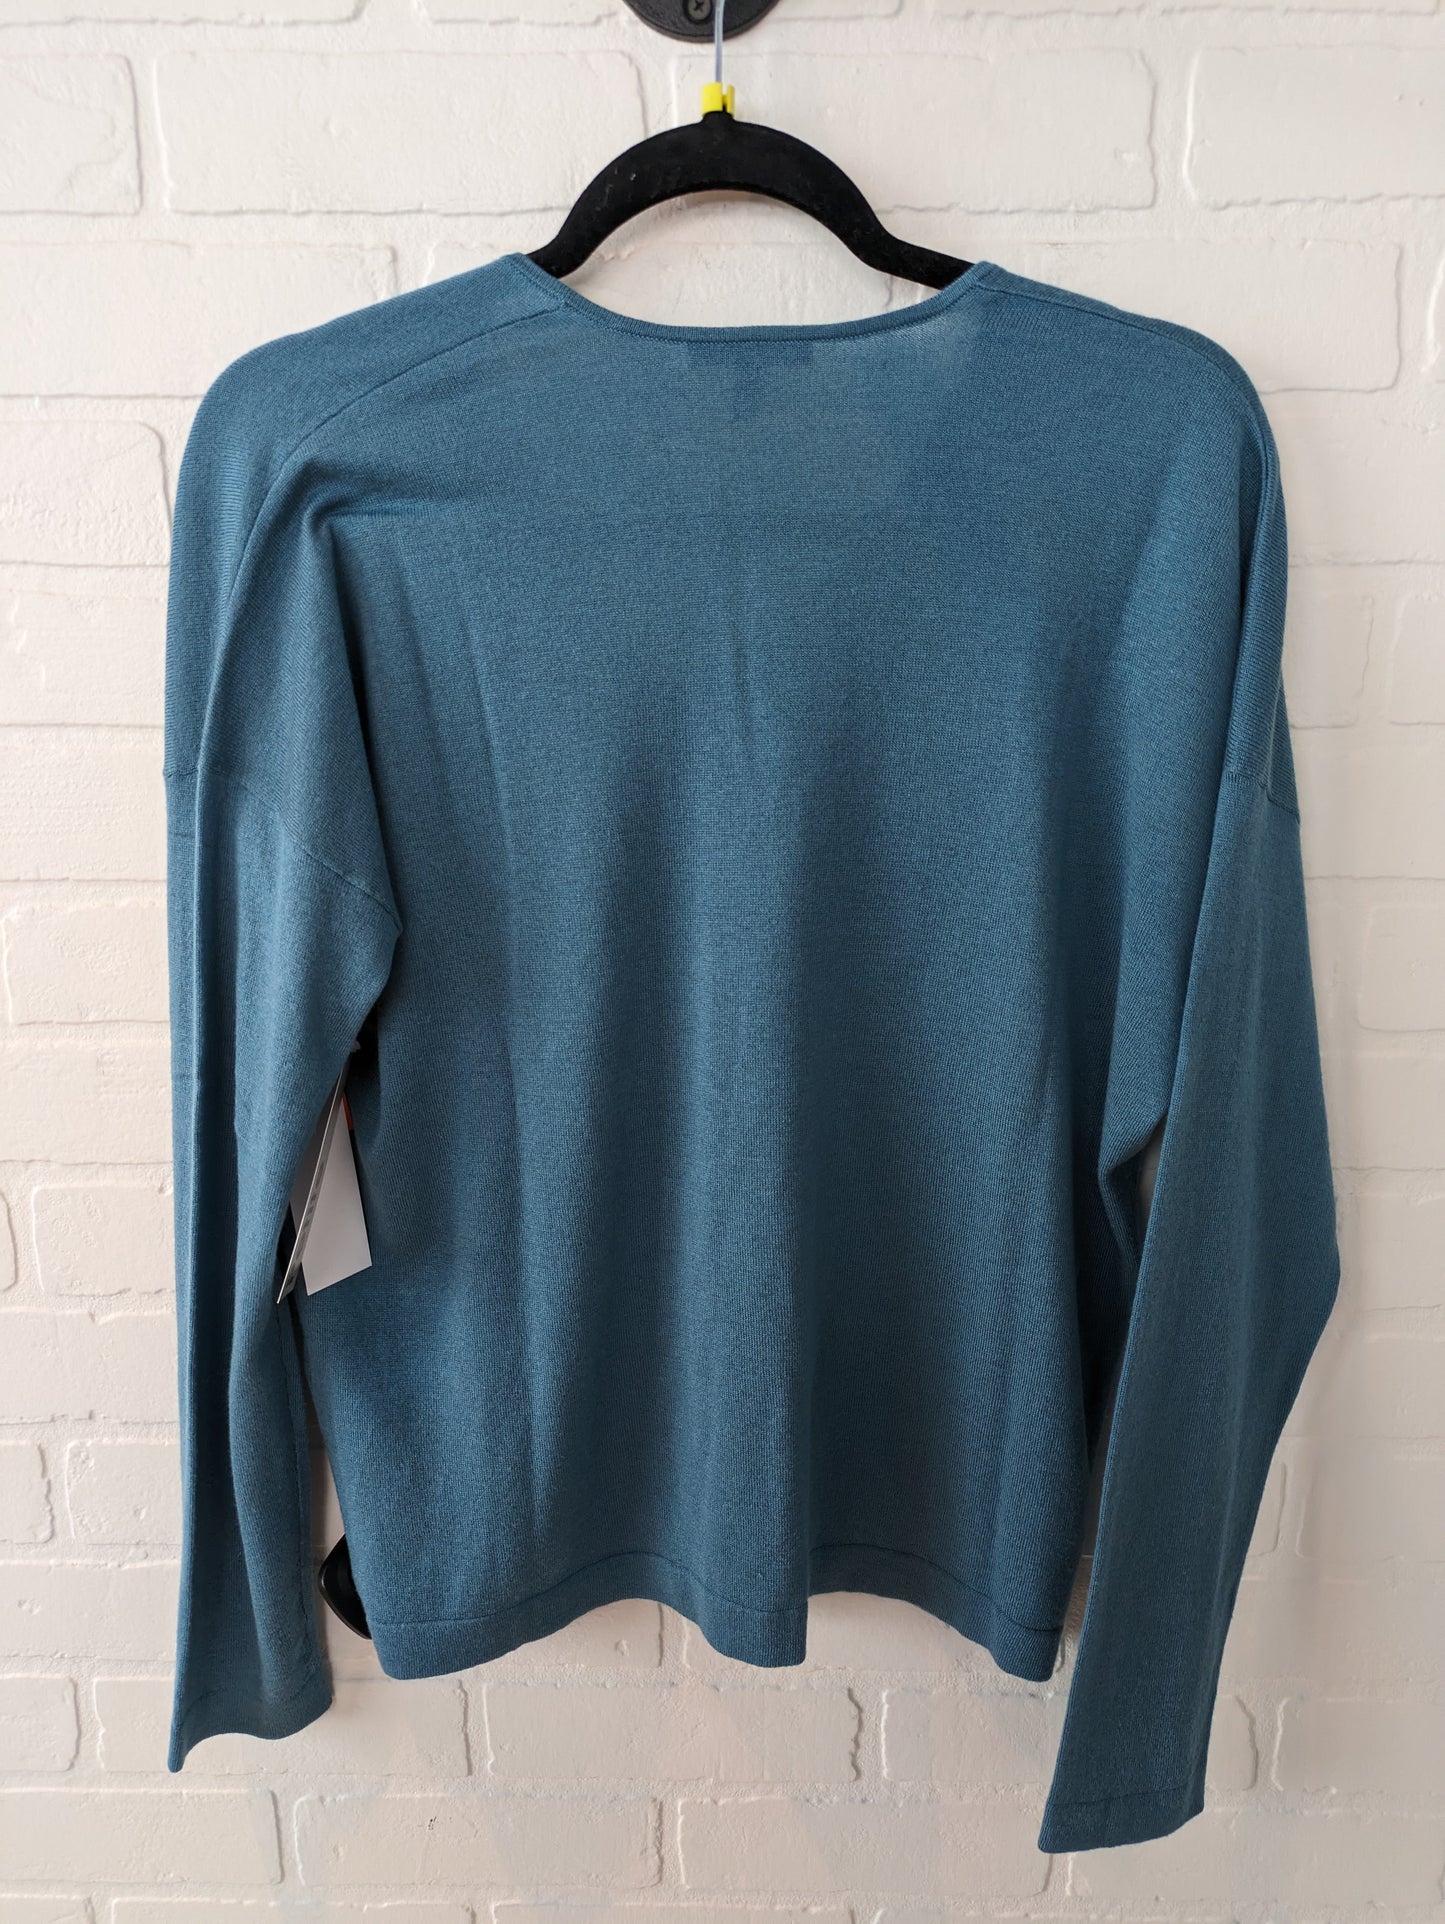 Sweater By Eileen Fisher  Size: M